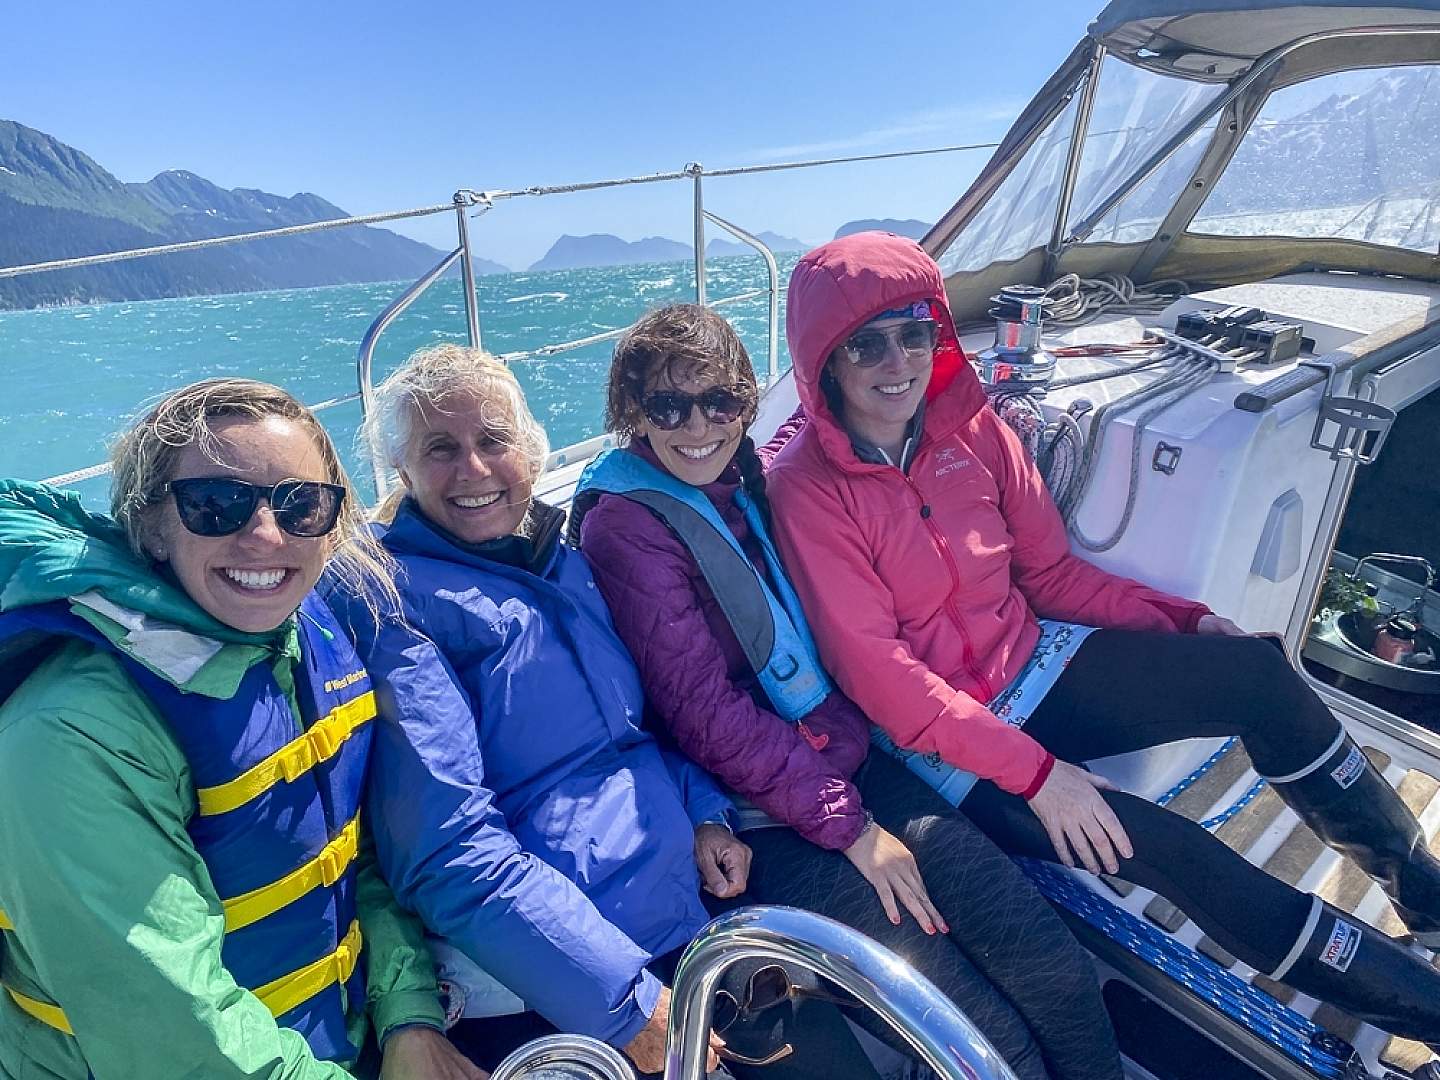 Explore the waters and wildlife of Resurrection Bay on a sailboat with a captain or by sailing yourself. Day trips or multi-day.